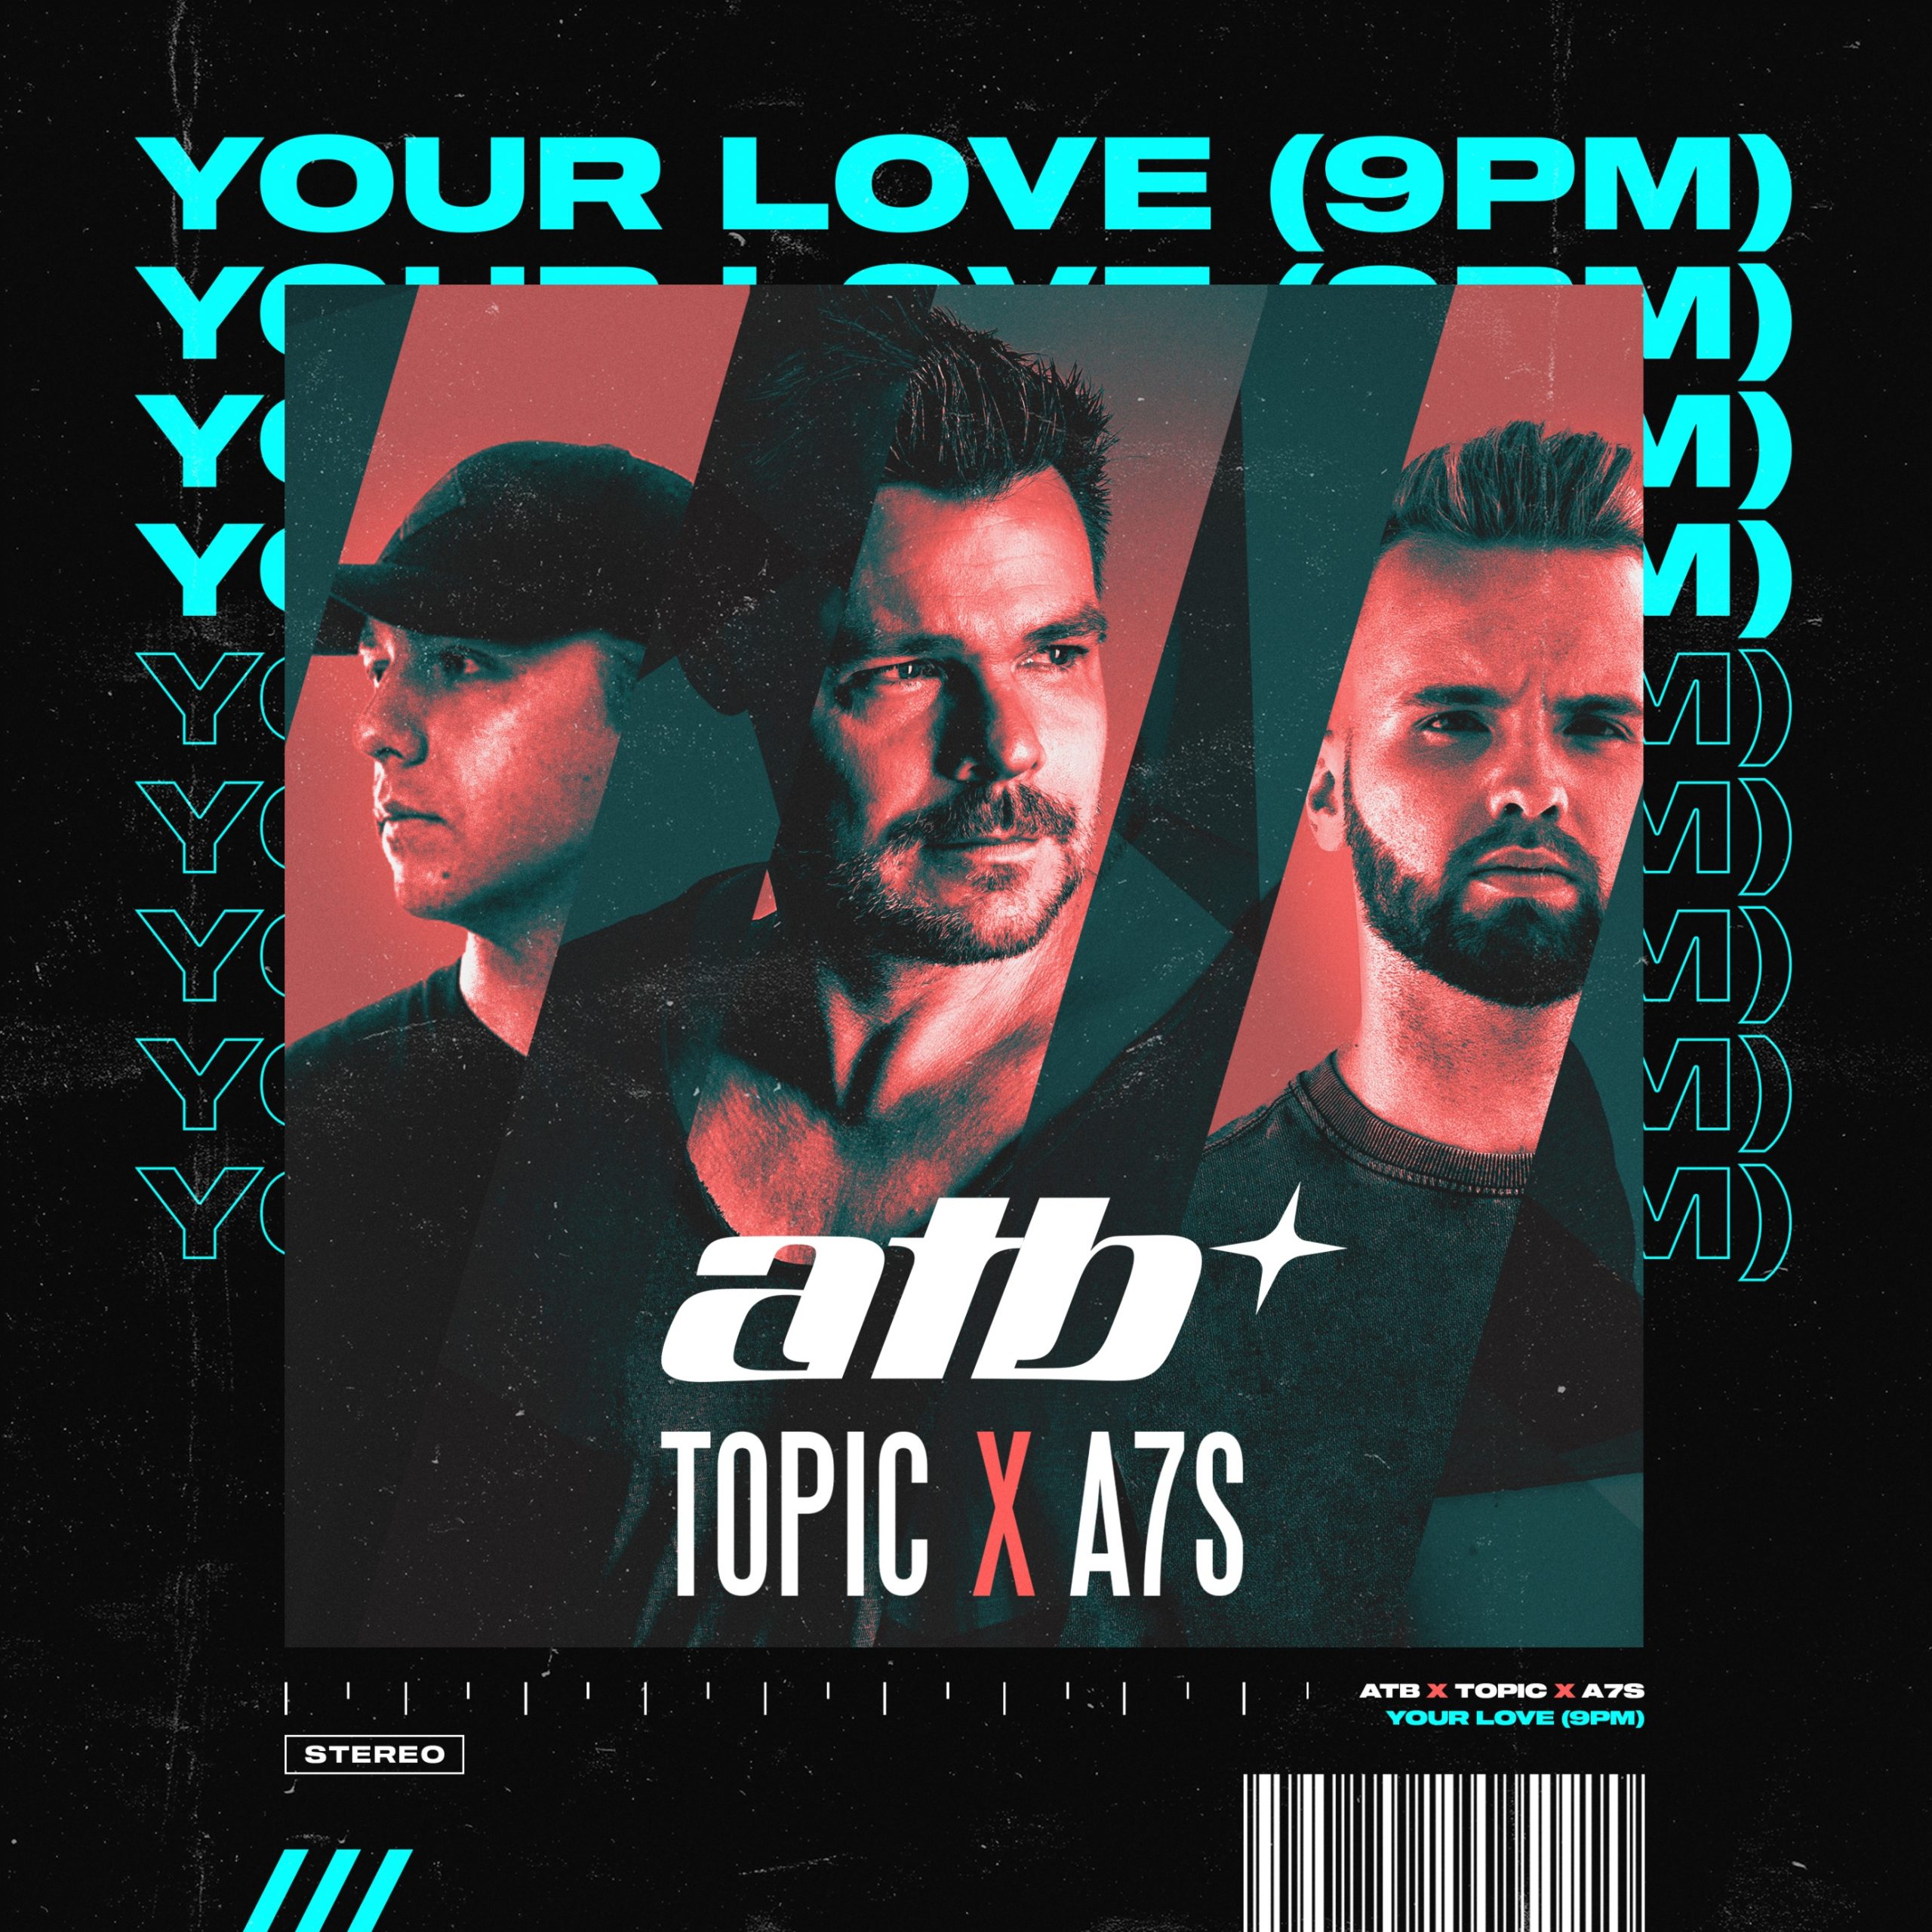 ATB, Topic and A7S - "Your Love (9pm)" single artwork